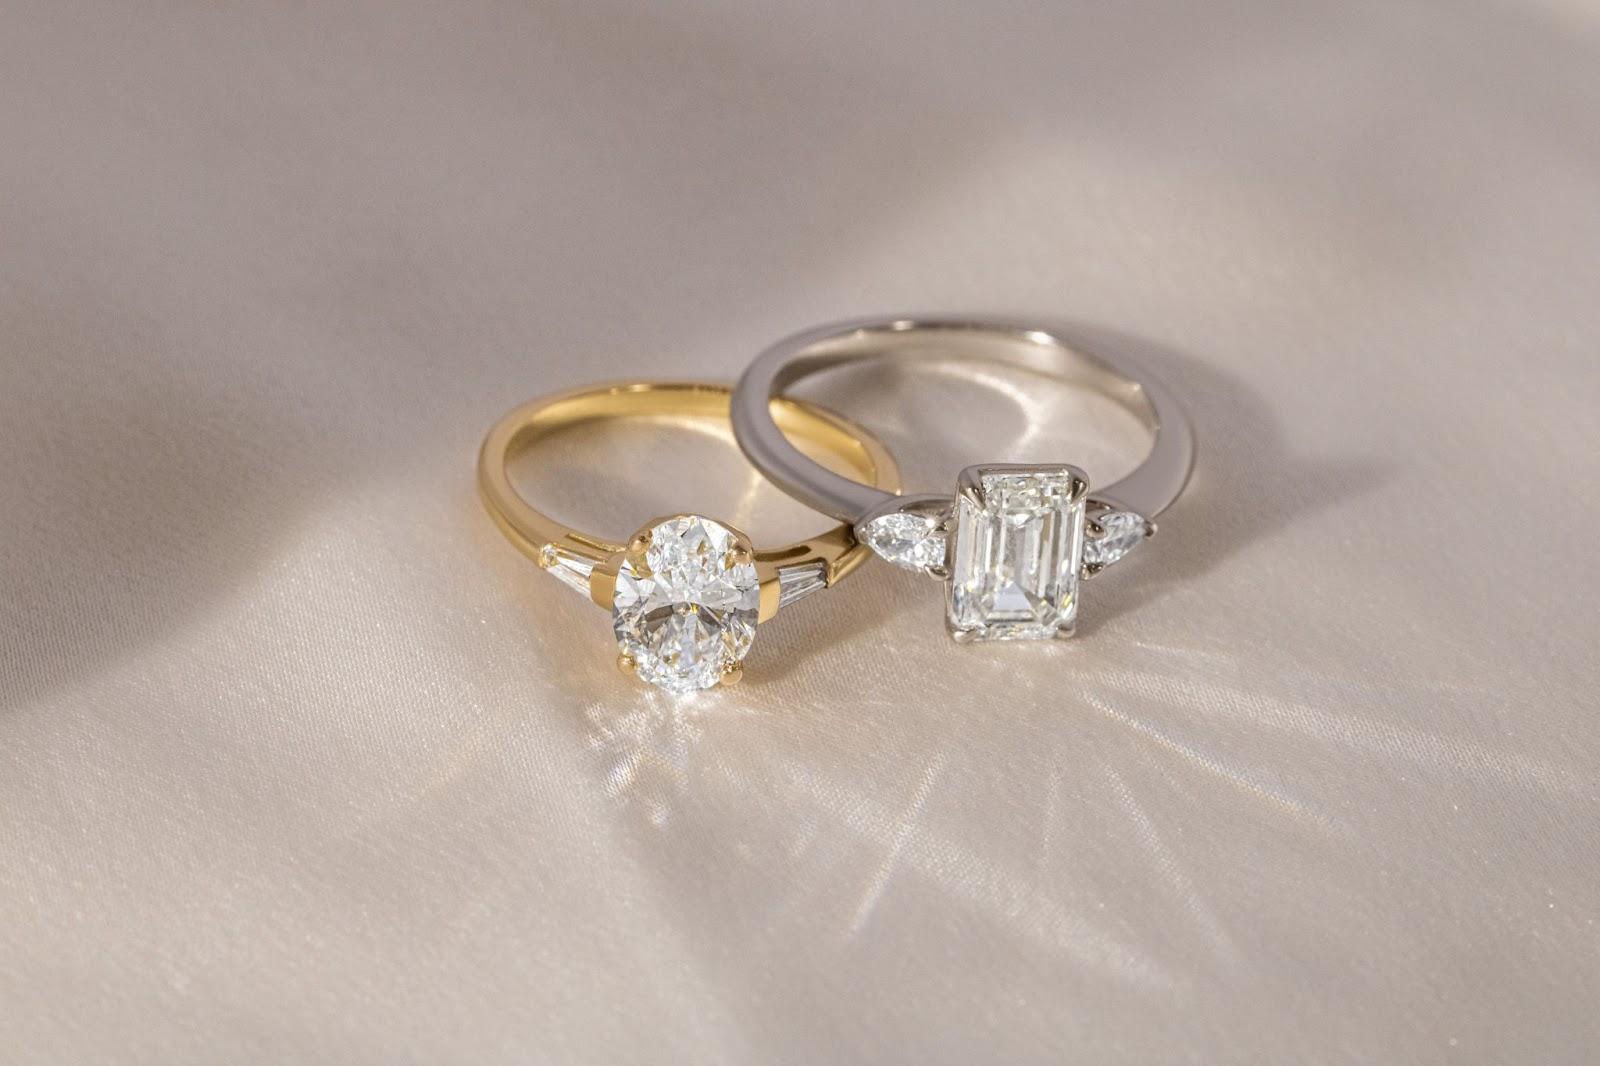 What are the Reasons that Make the Trilogy Engagement Ring the Perfect Wedding Ring?